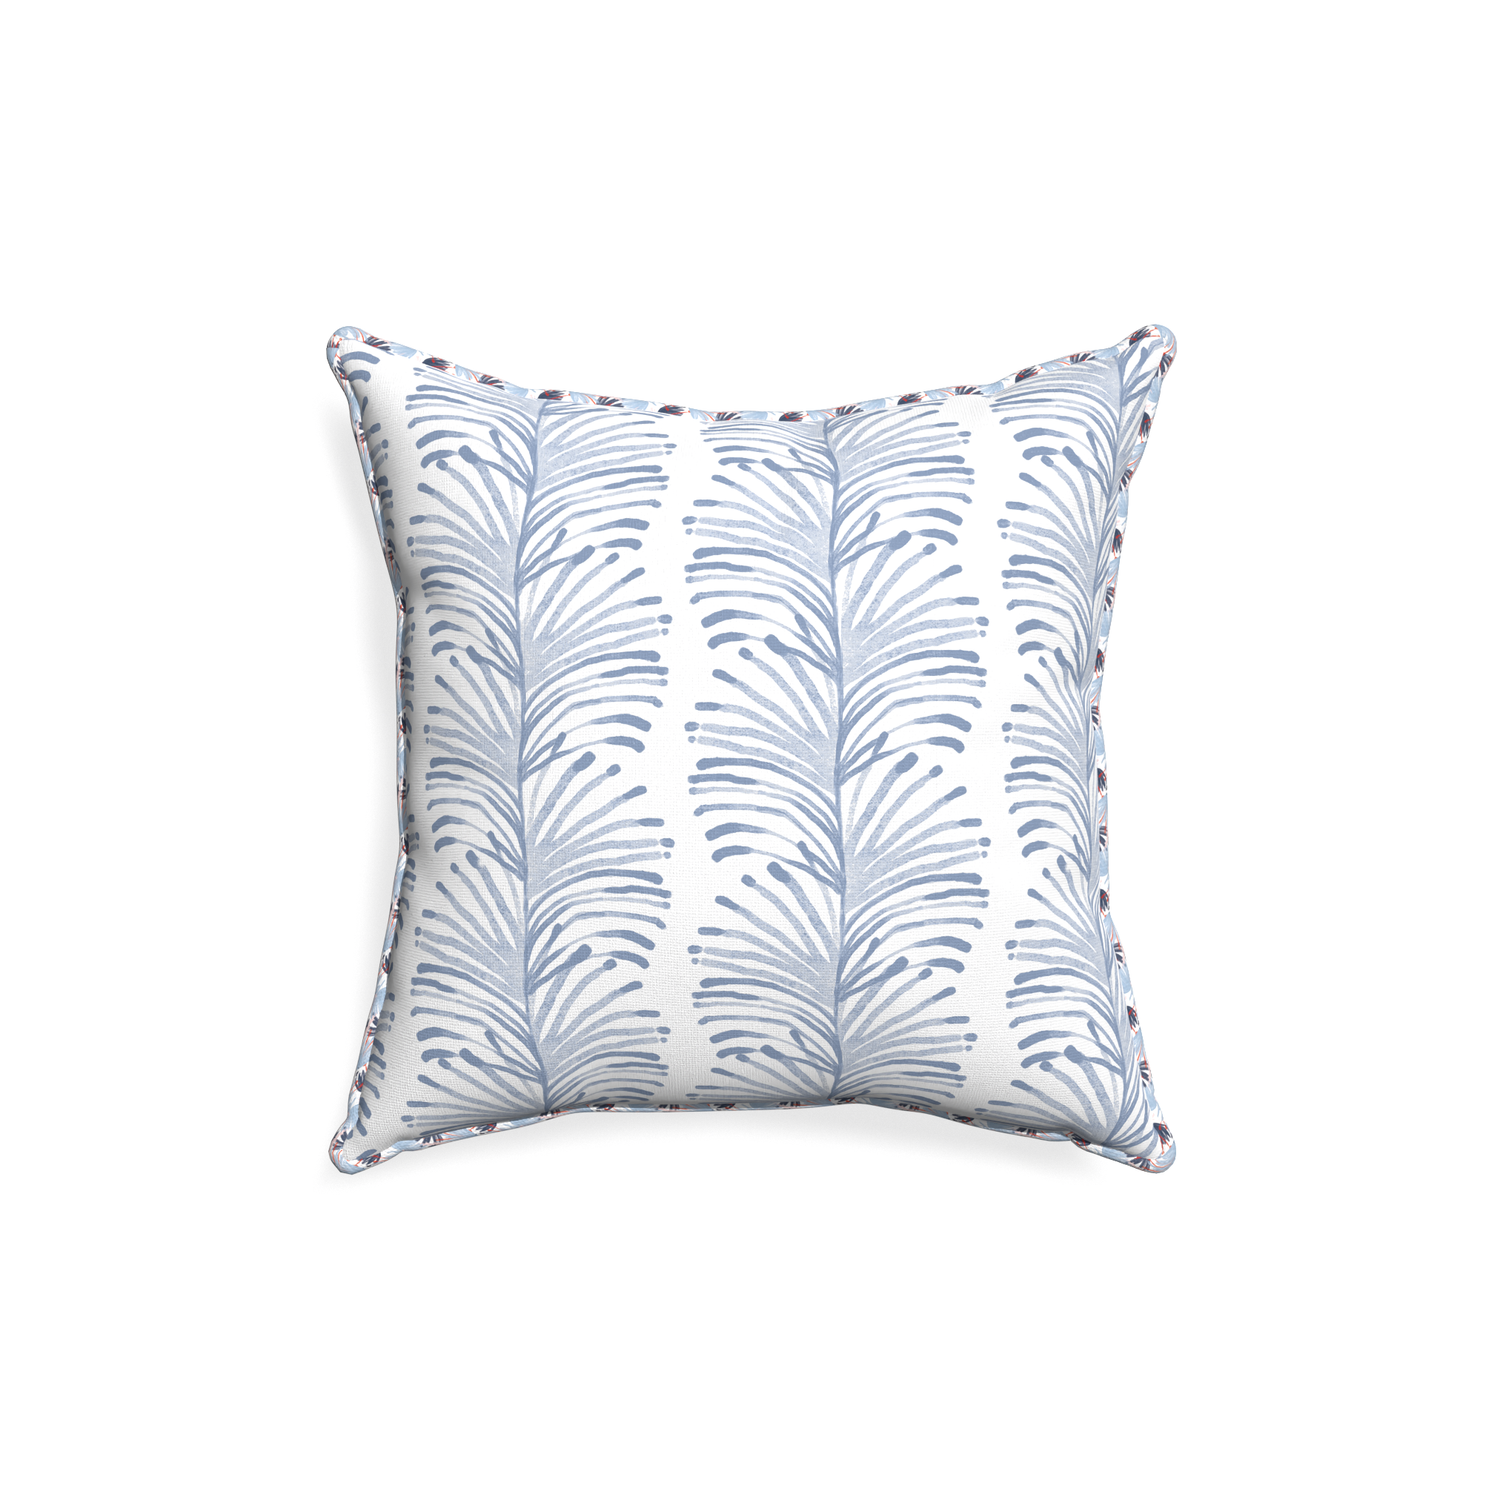 18-square emma sky custom pillow with e piping on white background